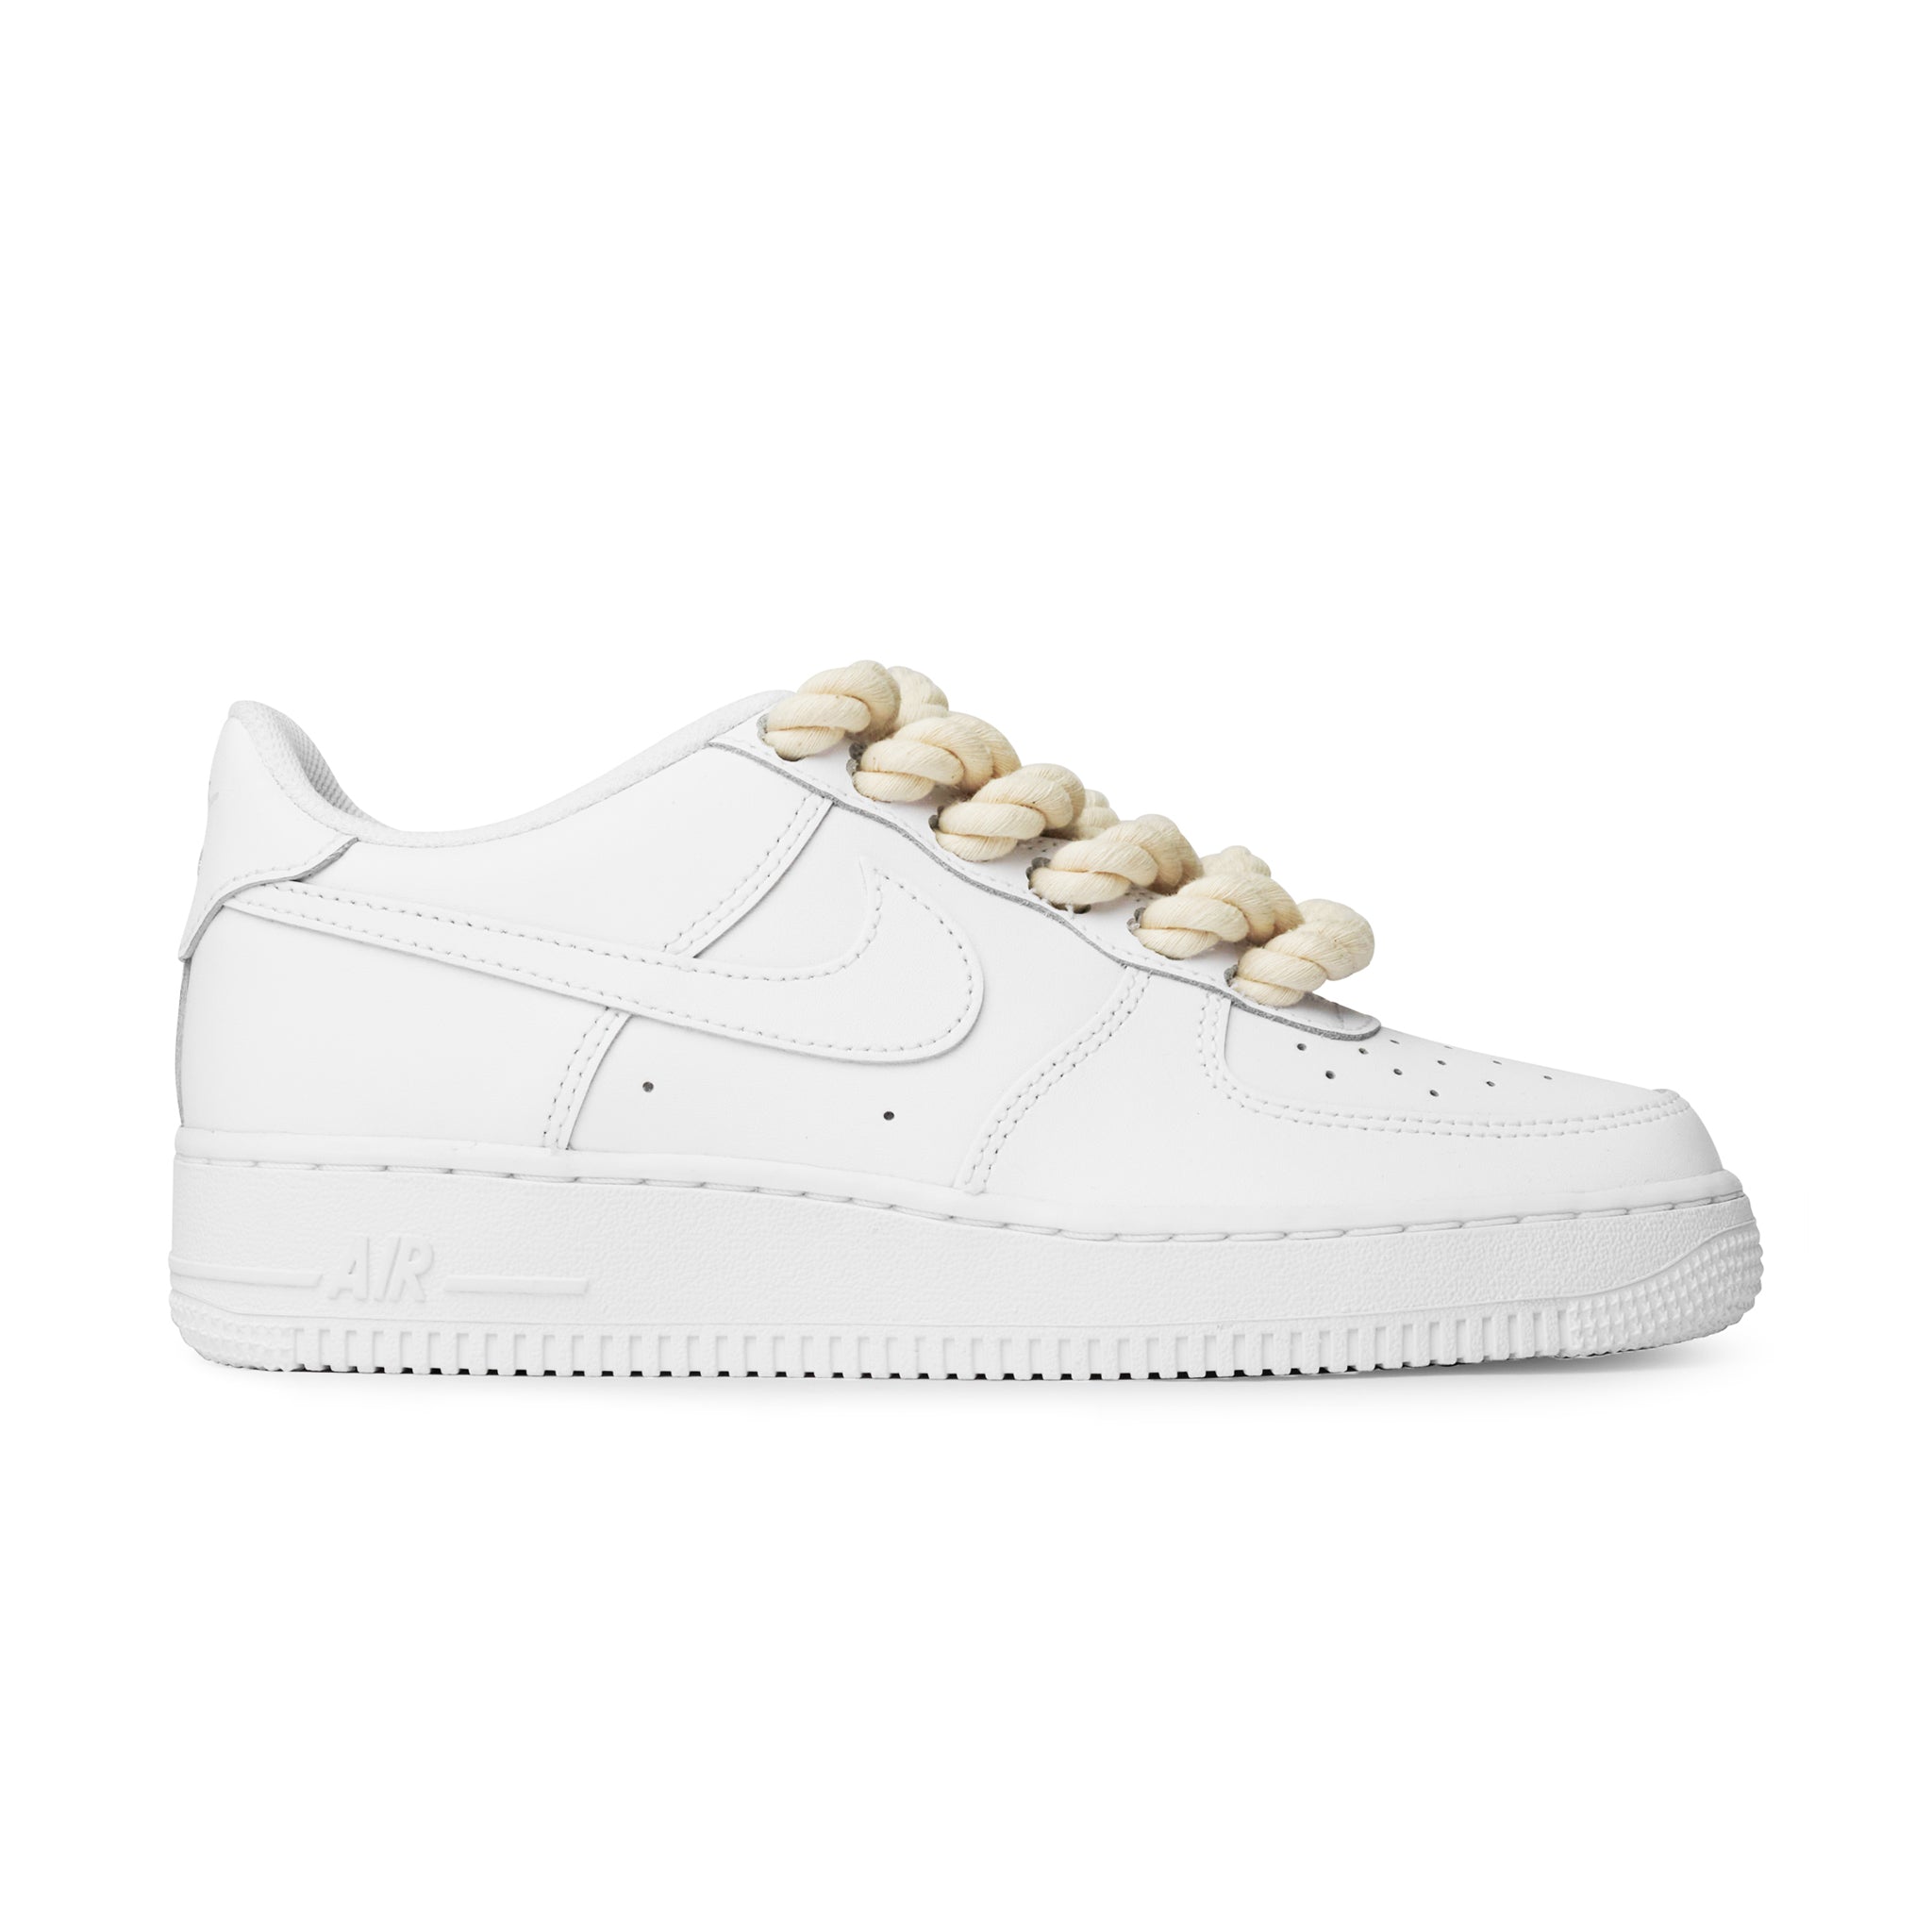 Side view of Nike Air Force 1 Low Rope Lace White Cream (GS) 314192-117